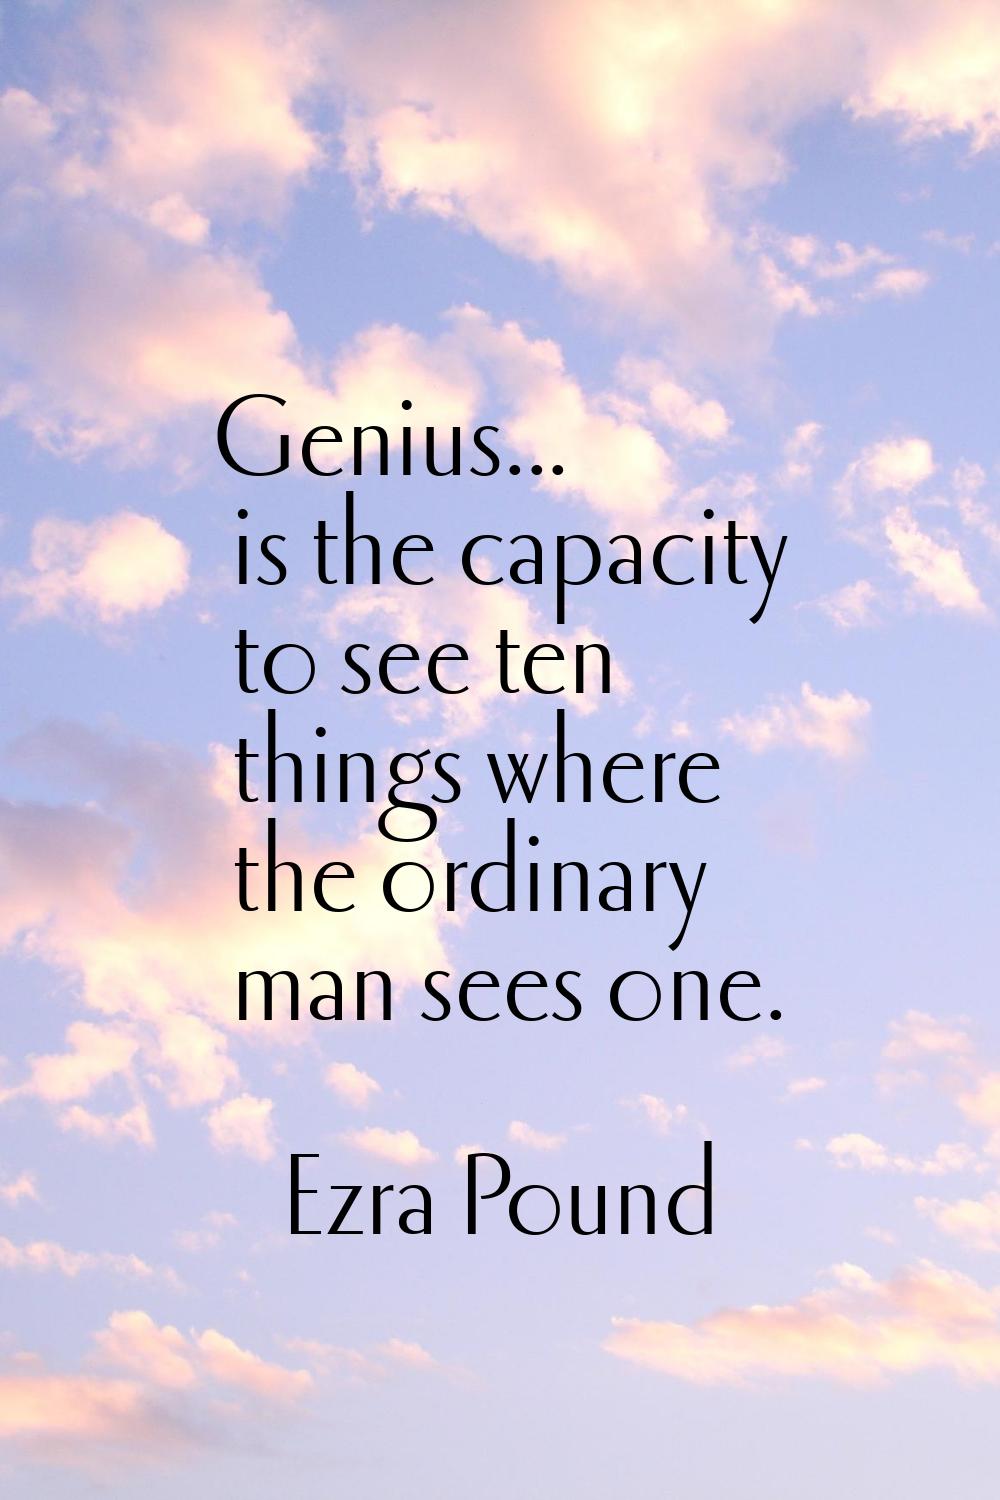 Genius... is the capacity to see ten things where the ordinary man sees one.